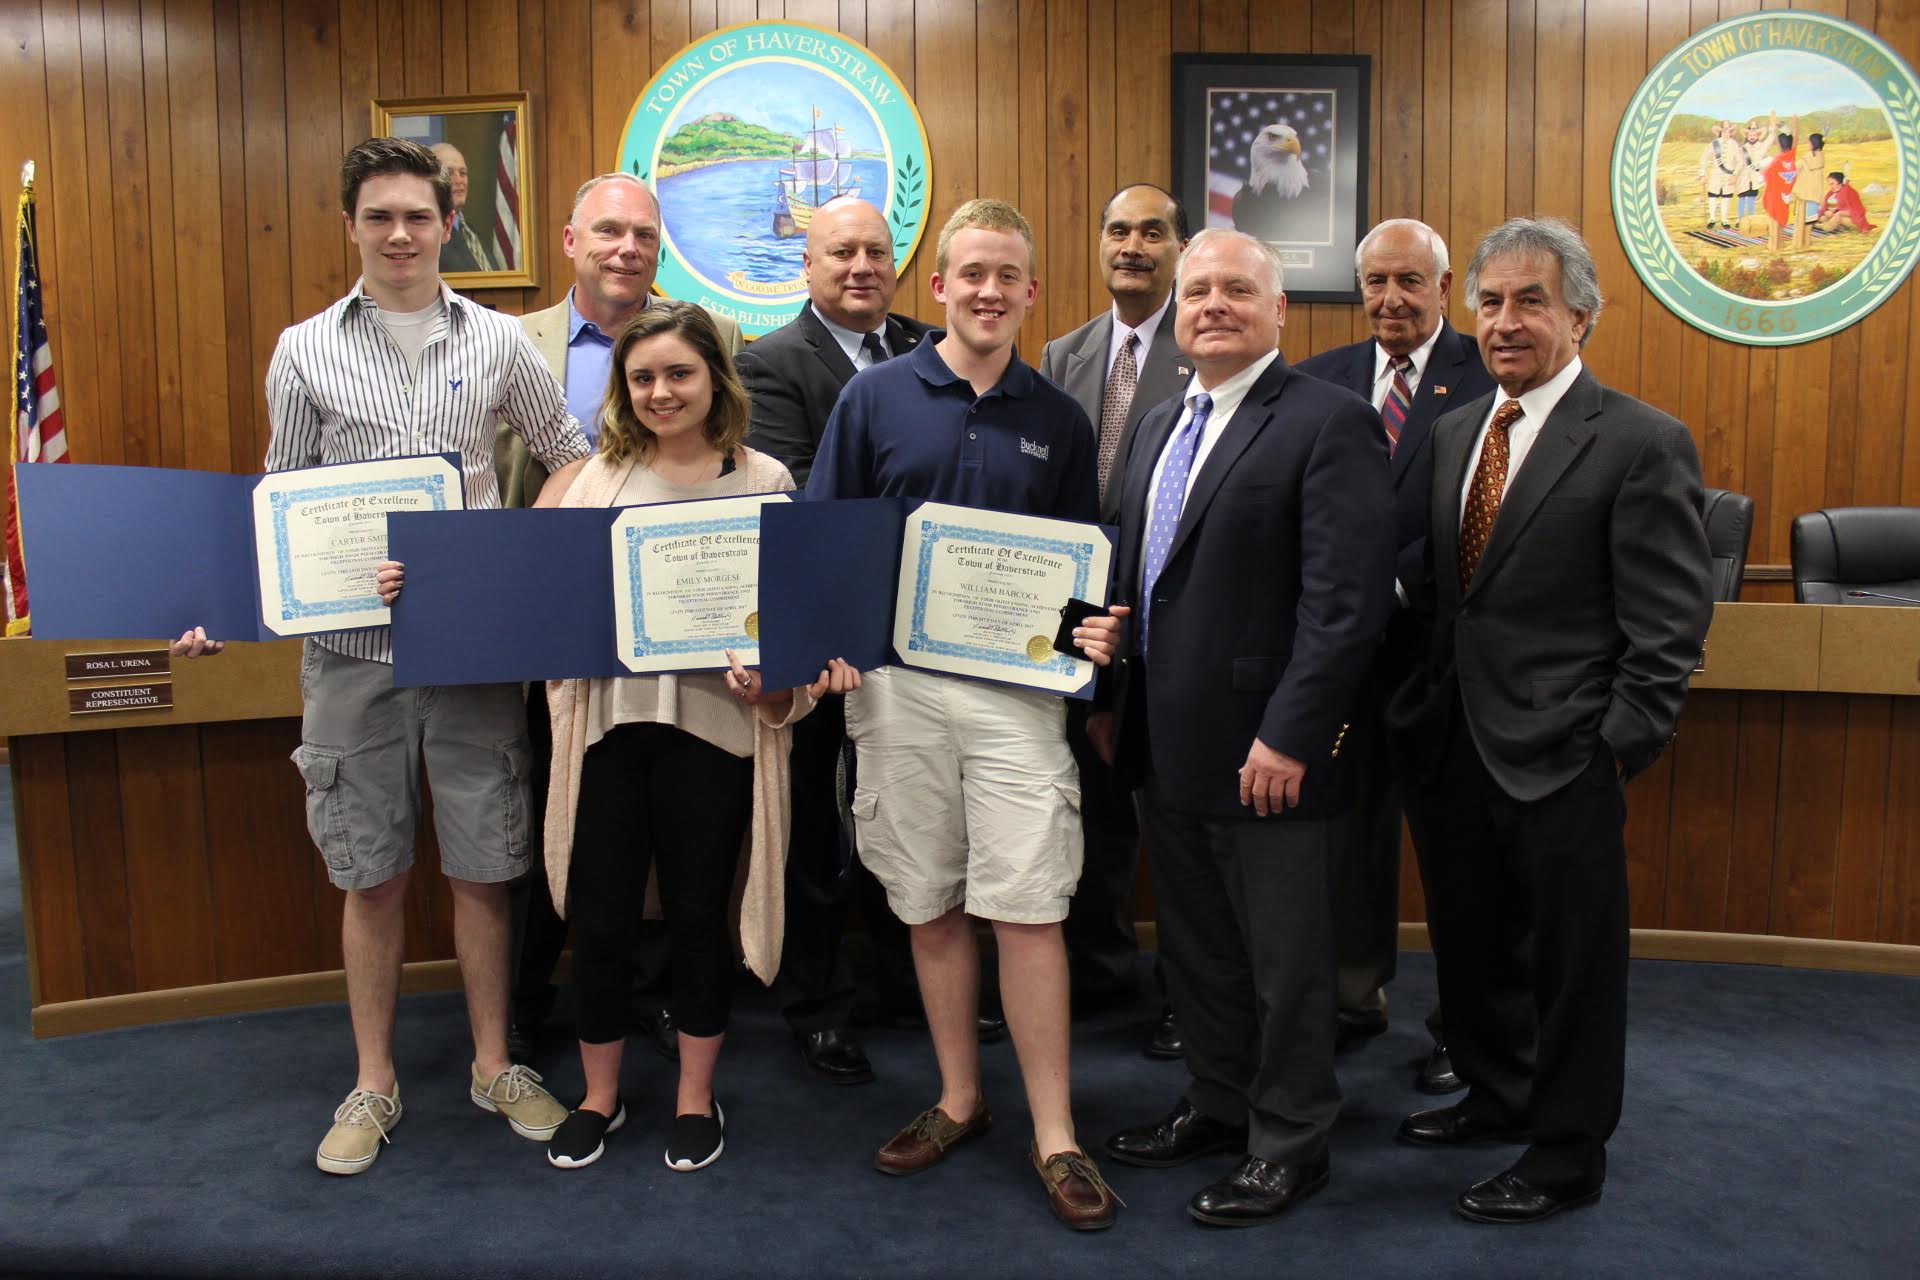 SOCIAL STUDIES STUDENTS HONORED BY HAVERSTRAW TOWN BOARD